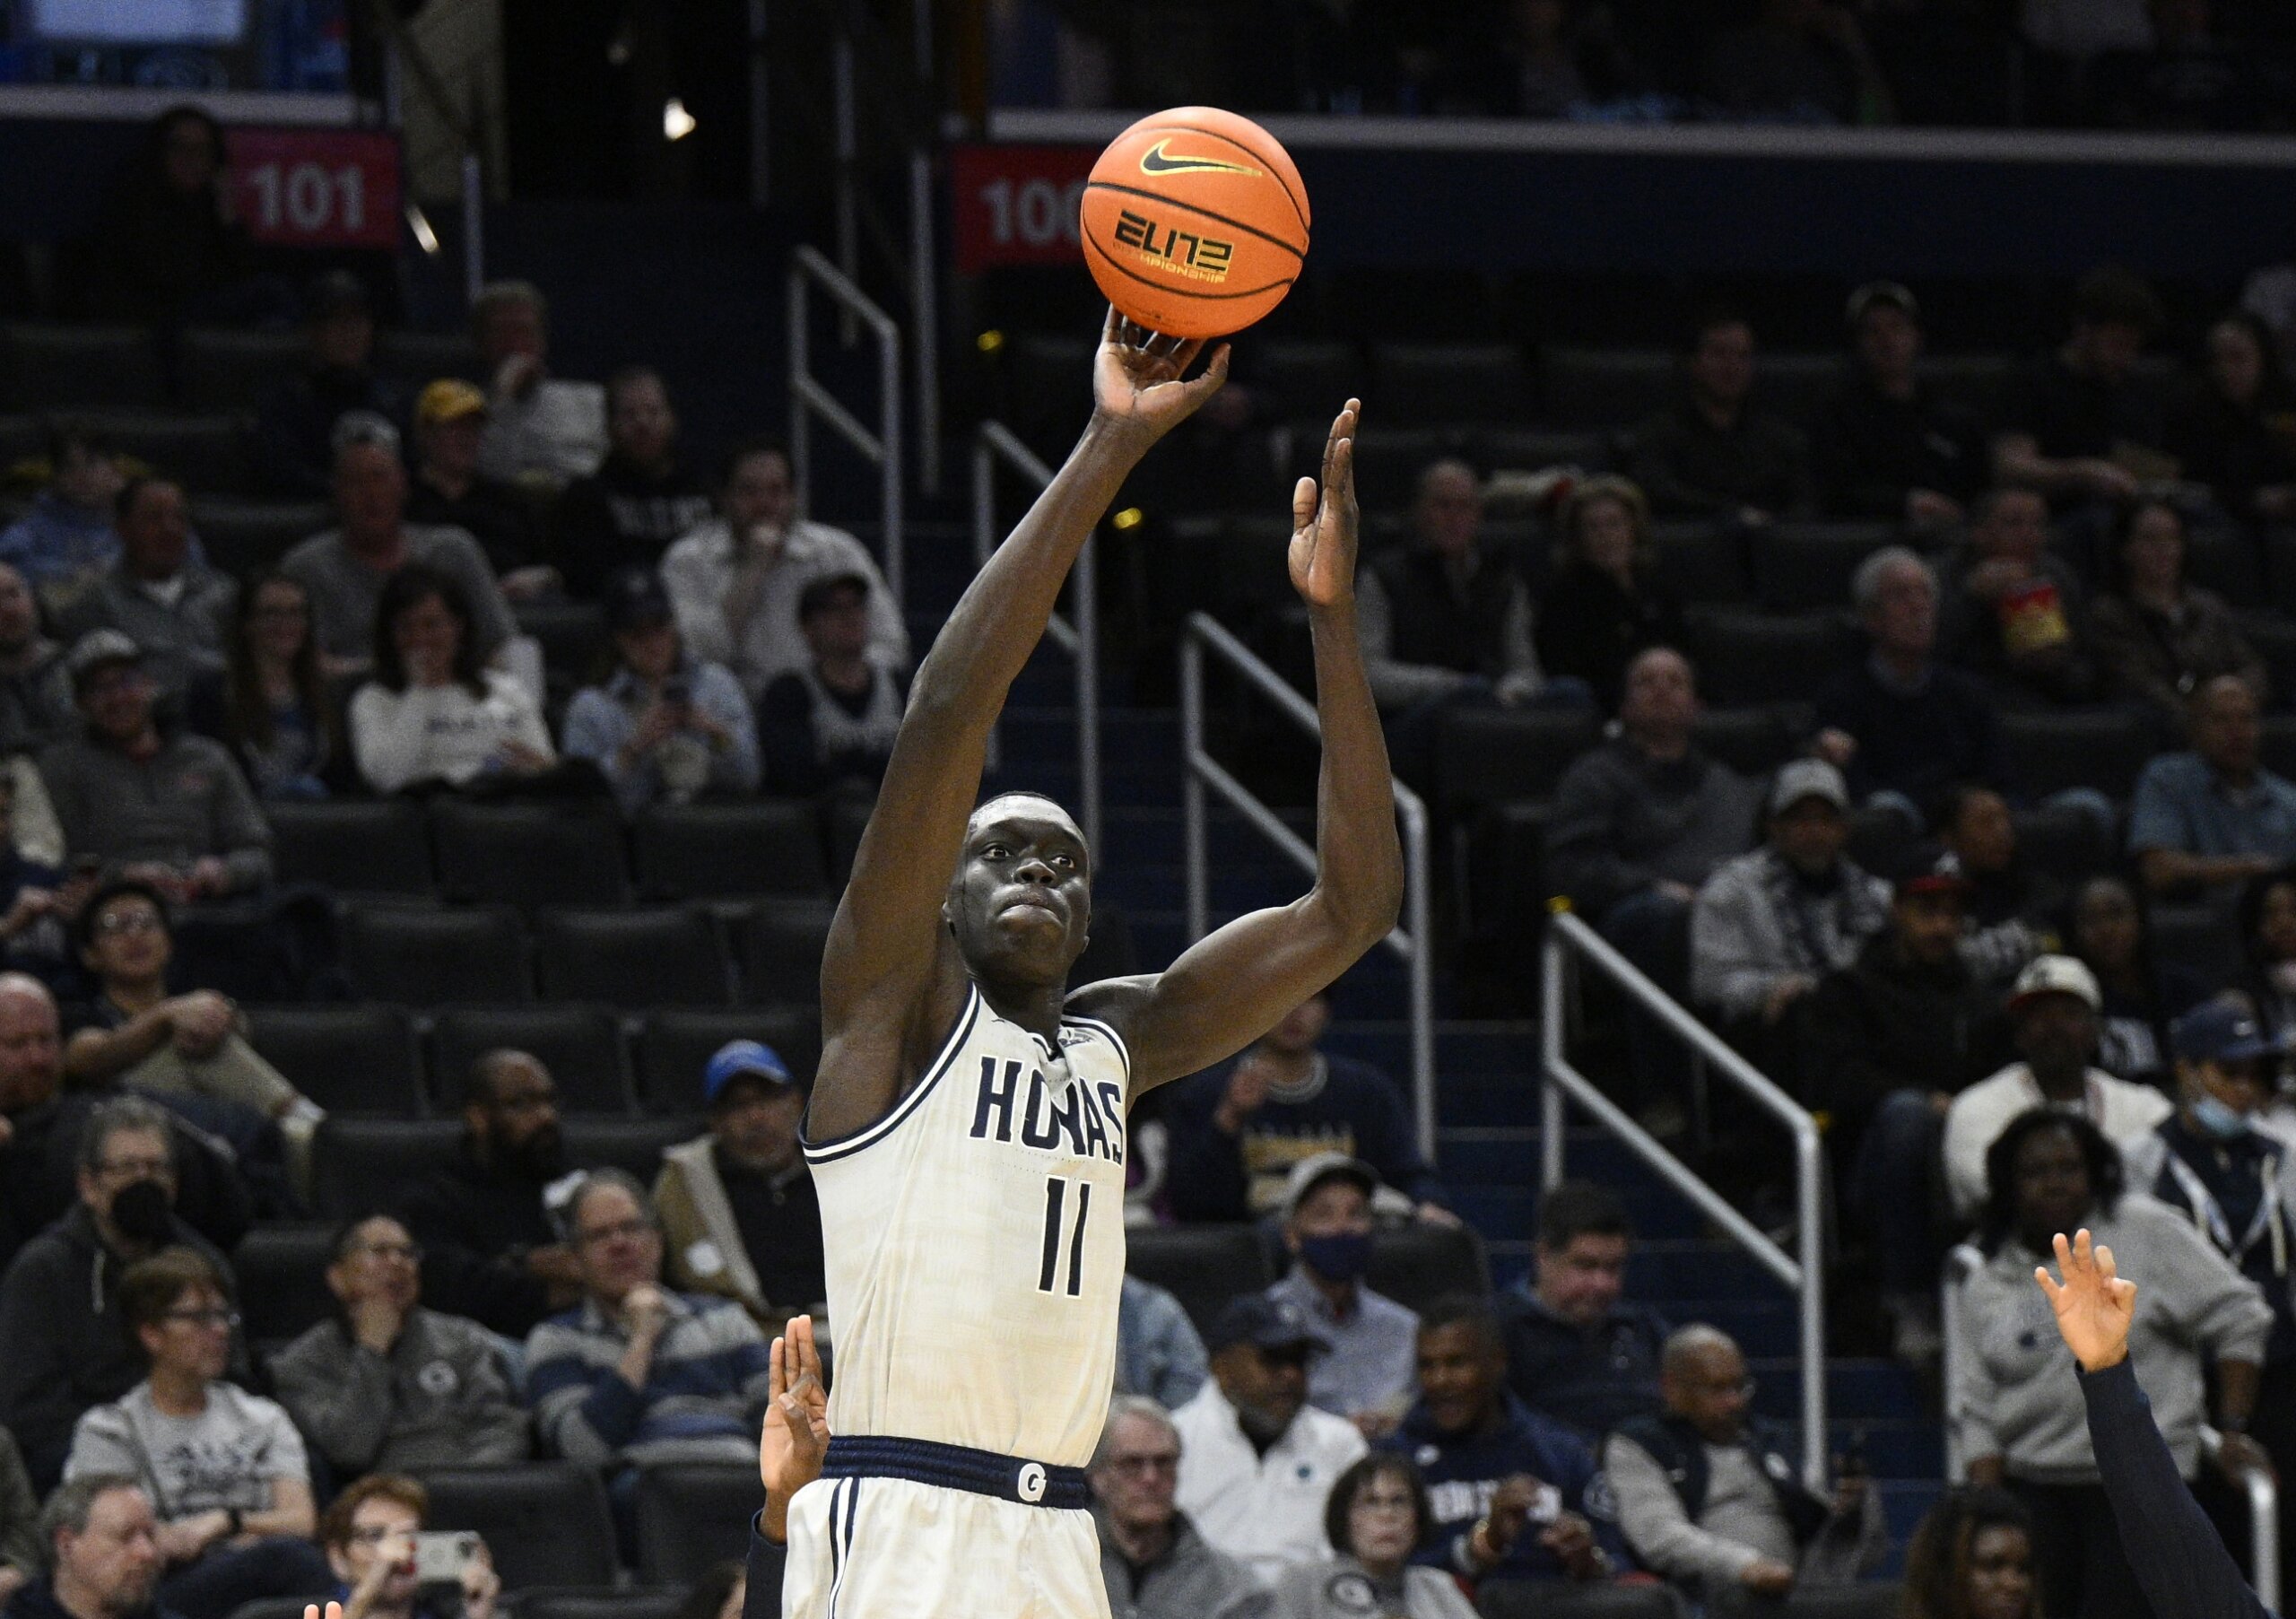 West Virginia forward Akok Akok released from hospital after collapsing on court during exhibition